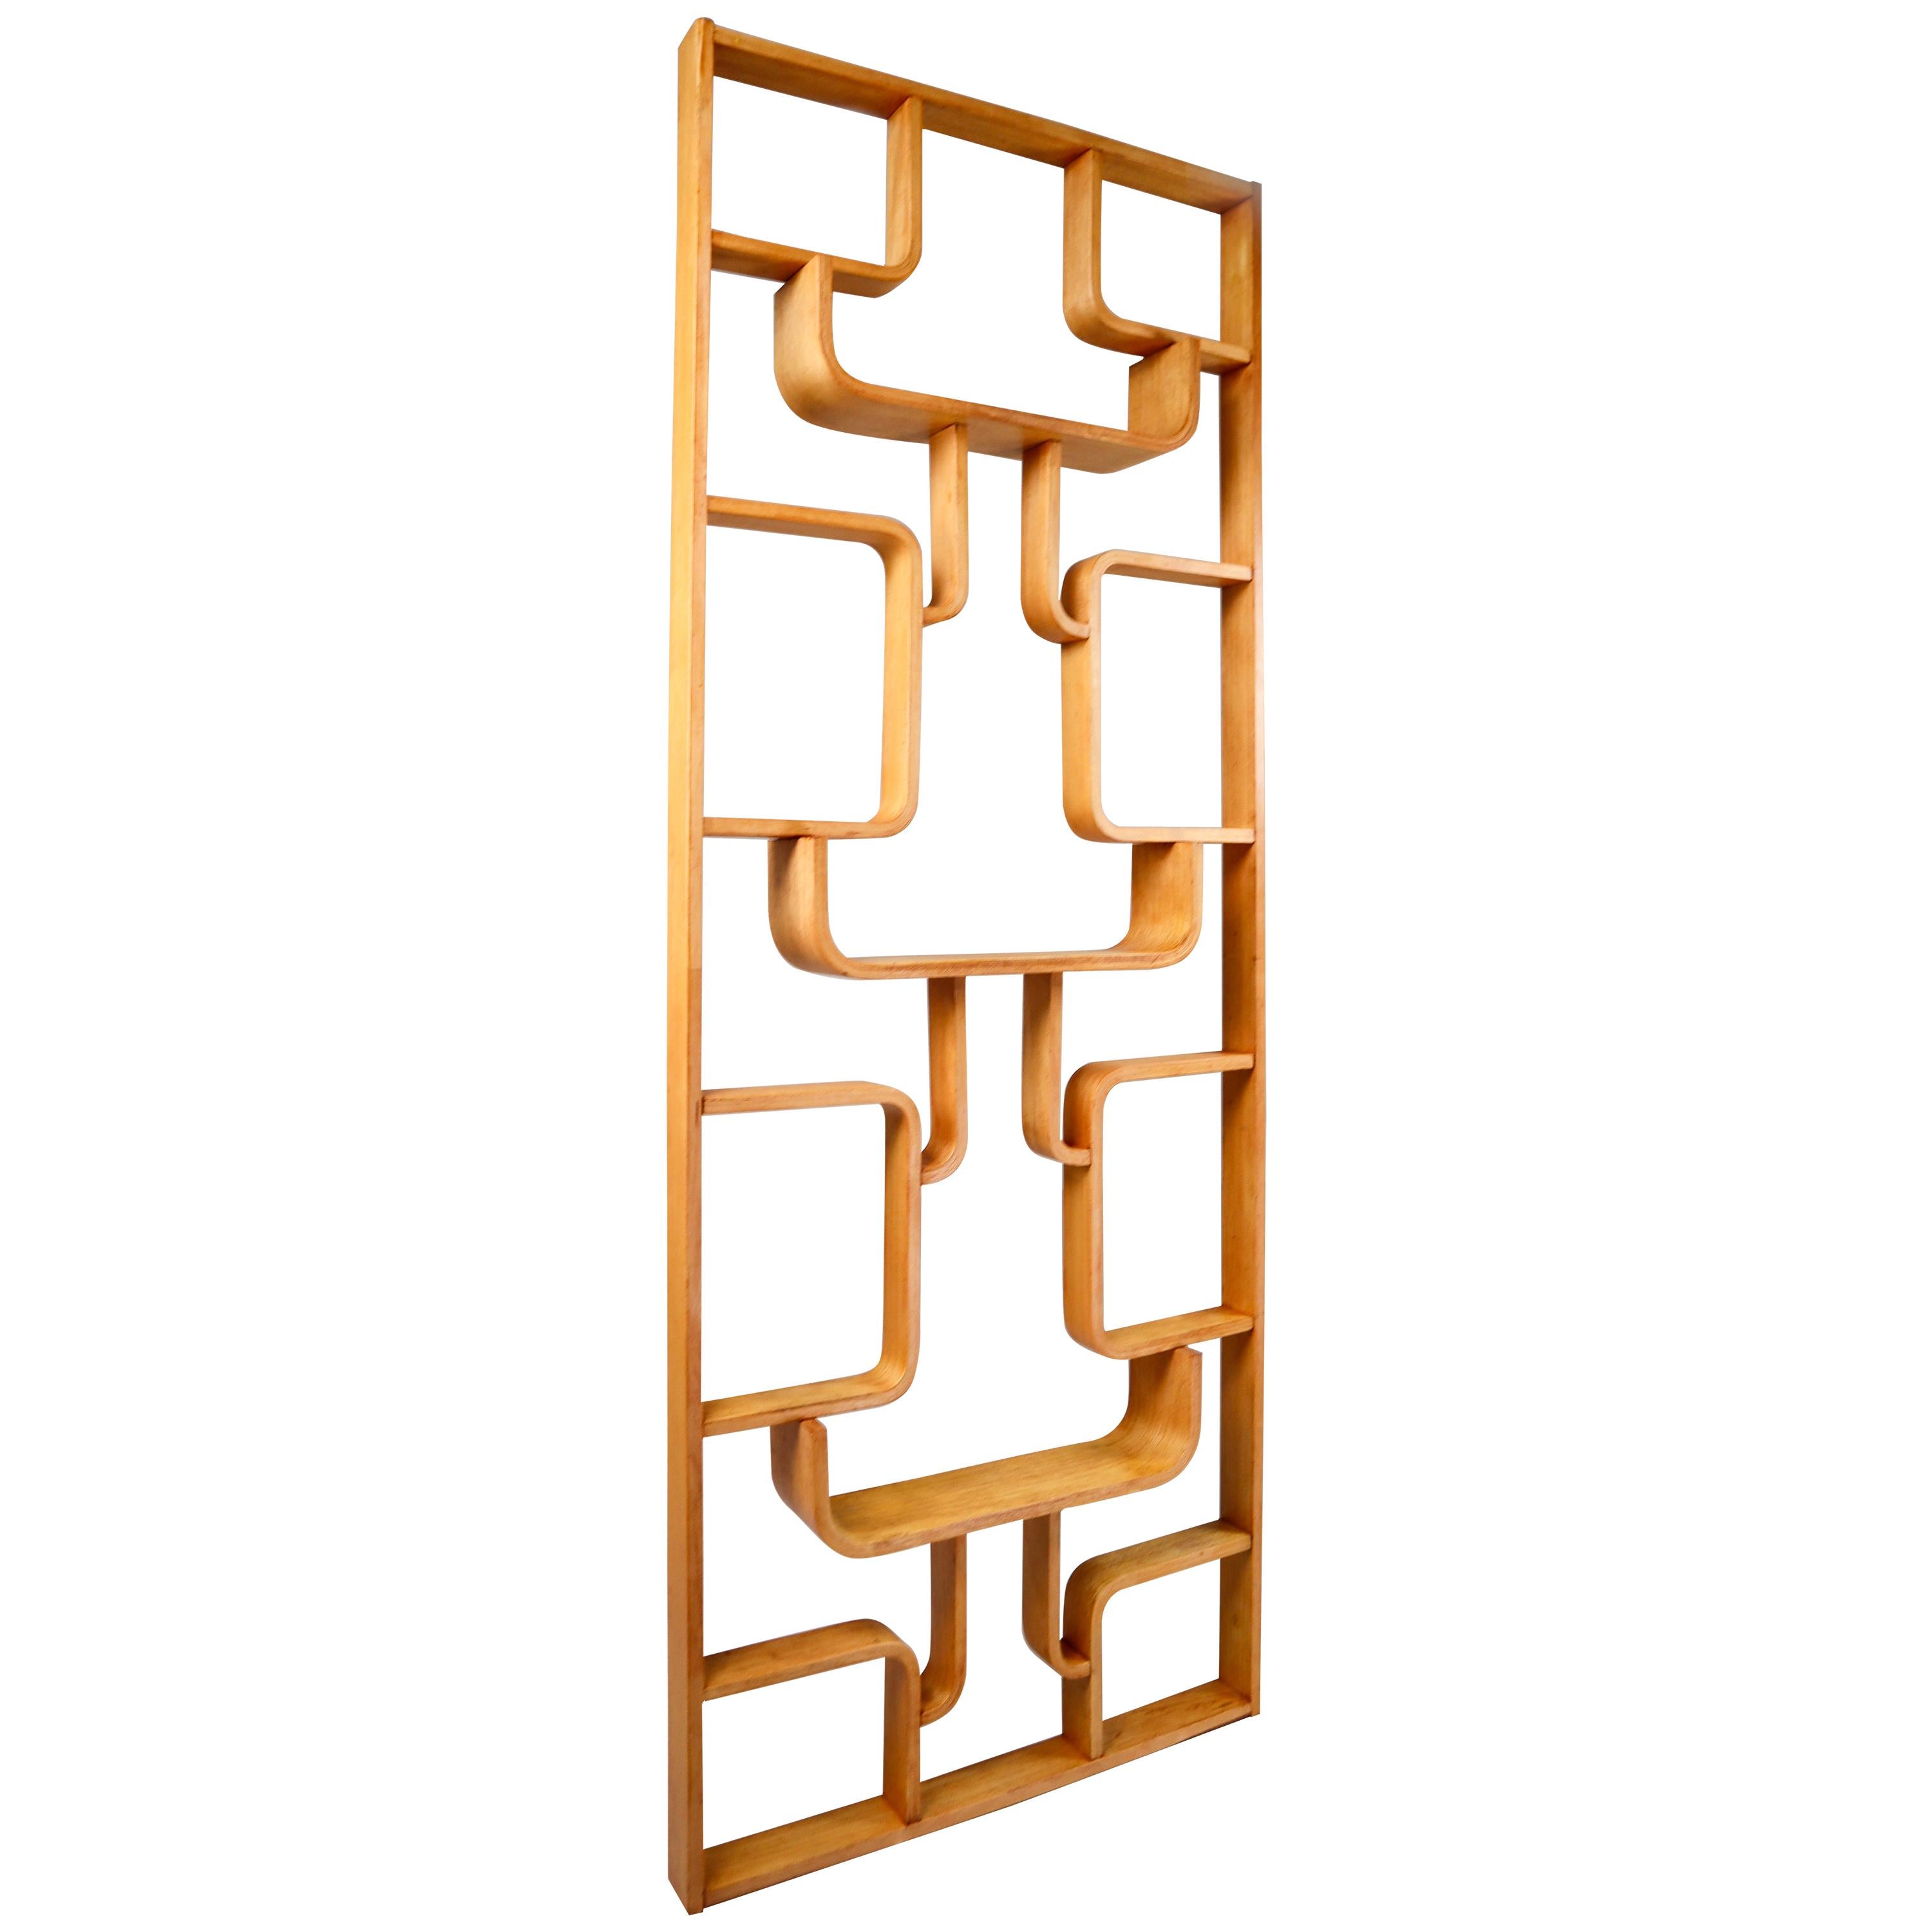 Midcentury Room Divider in Blond Bentwood, Czech Republic, 1960s